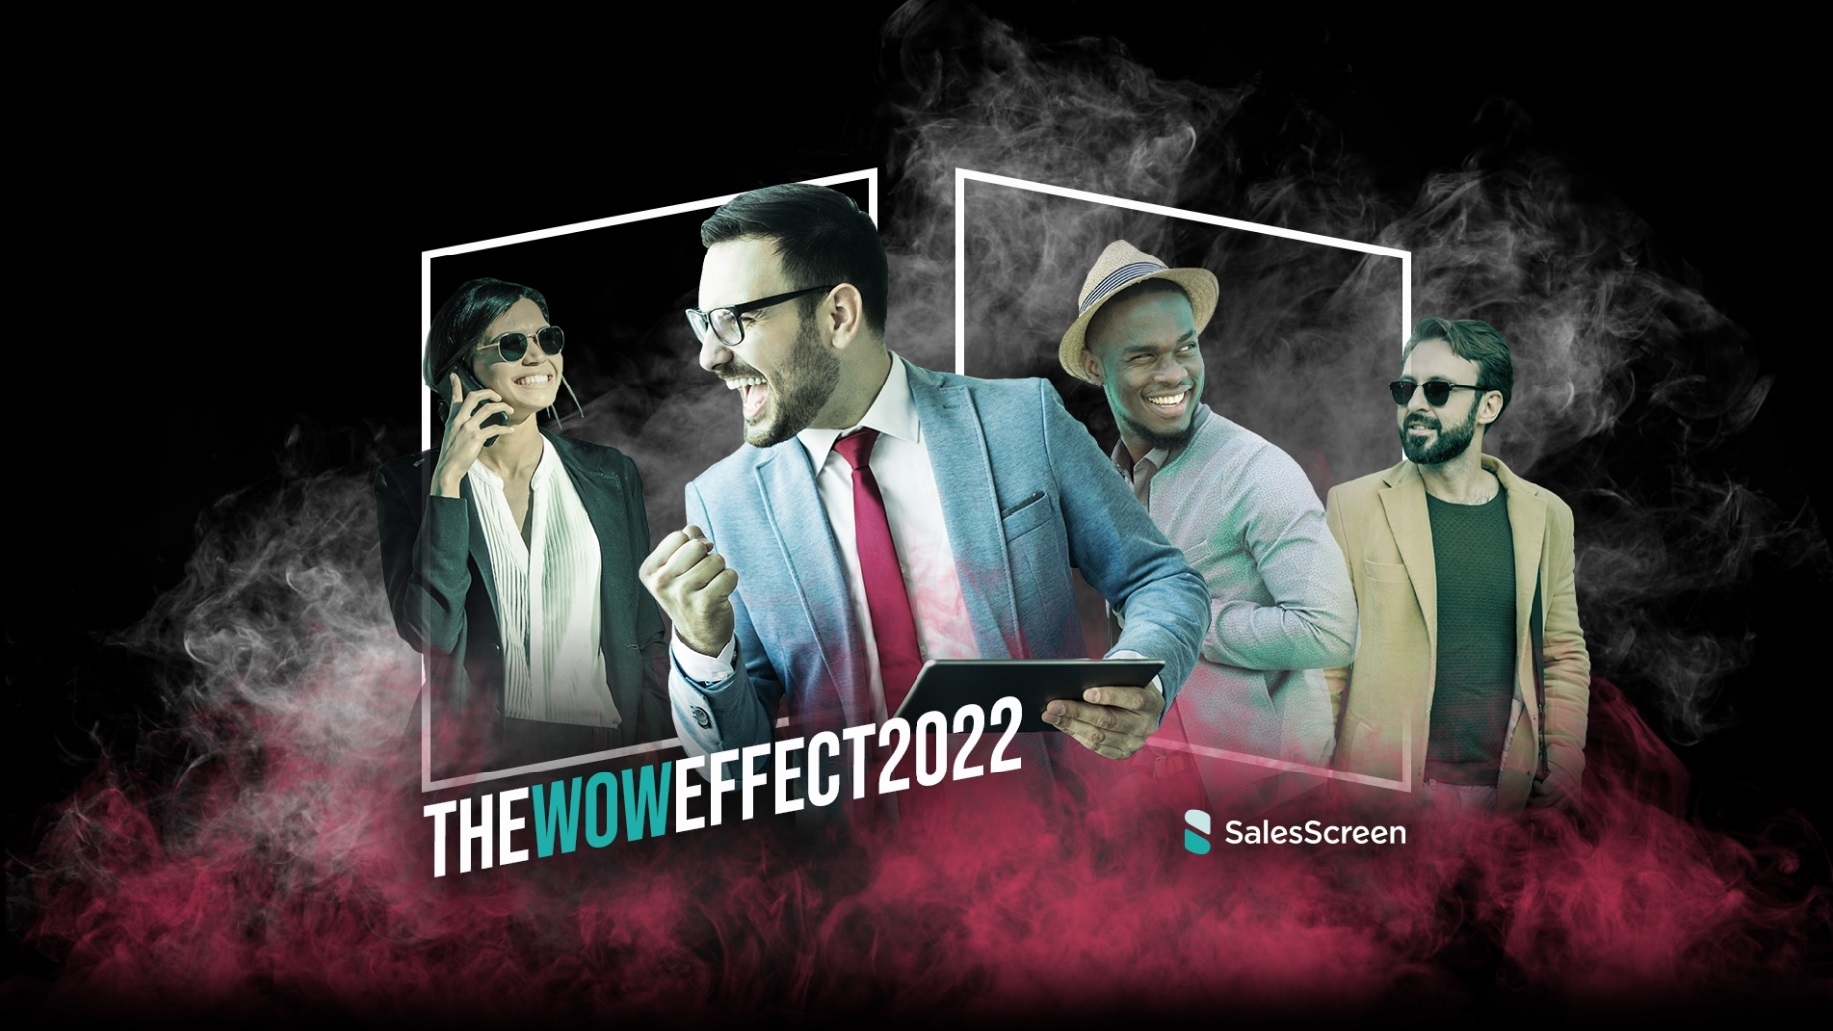 The WOW Effect 2022